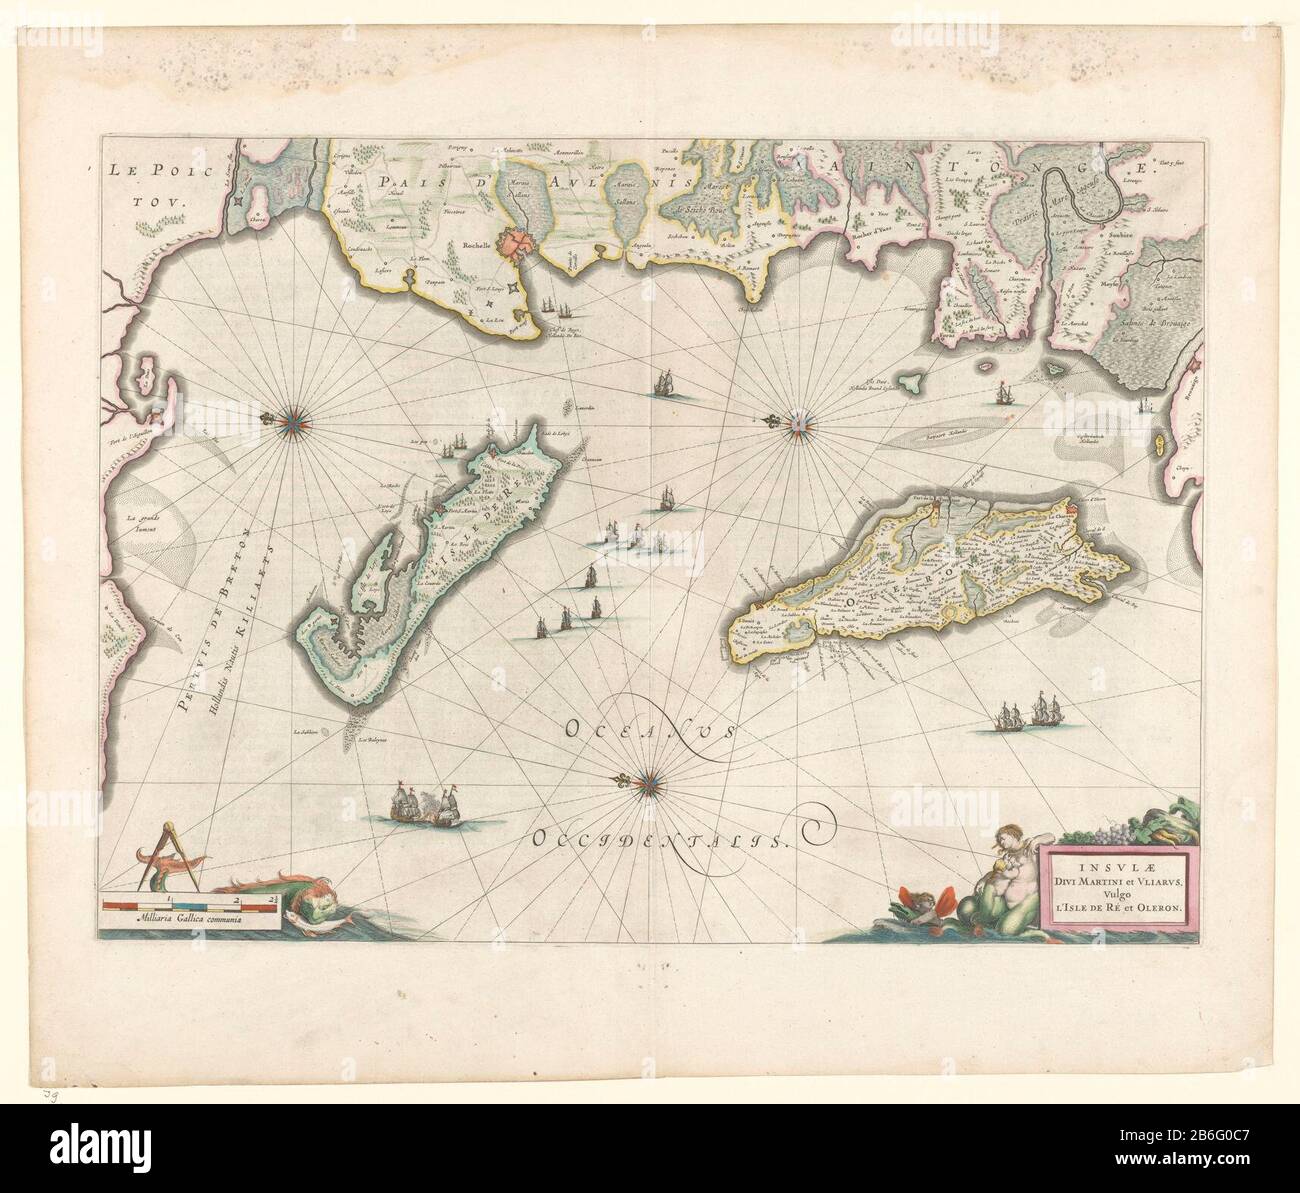 Map of the islands of Ré and Oléron and the French coast, land and coastal colored . Three wind roses, r.b, M.O. and L.B. North is on the left. Ships at sea. L. O. scale French miles with sea monster and passer. R.o. at inscription allegorical figures. Verso: 2 pages of text, two columns each. Inscriptions; R.O .: INSLAVAE / DIVI MARTINI et VLIARVS, Vulgo / L'Isle de RE et OLERON. Manufacturer : publisher: Mercator Publisher: Jodocus Hondius Publisher: Janssonius Dating: 1600 - 1650 Material: paper Technique: engra (printing process) / color dimensions: h 39 cm. B × 53.7 cm. Stock Photo